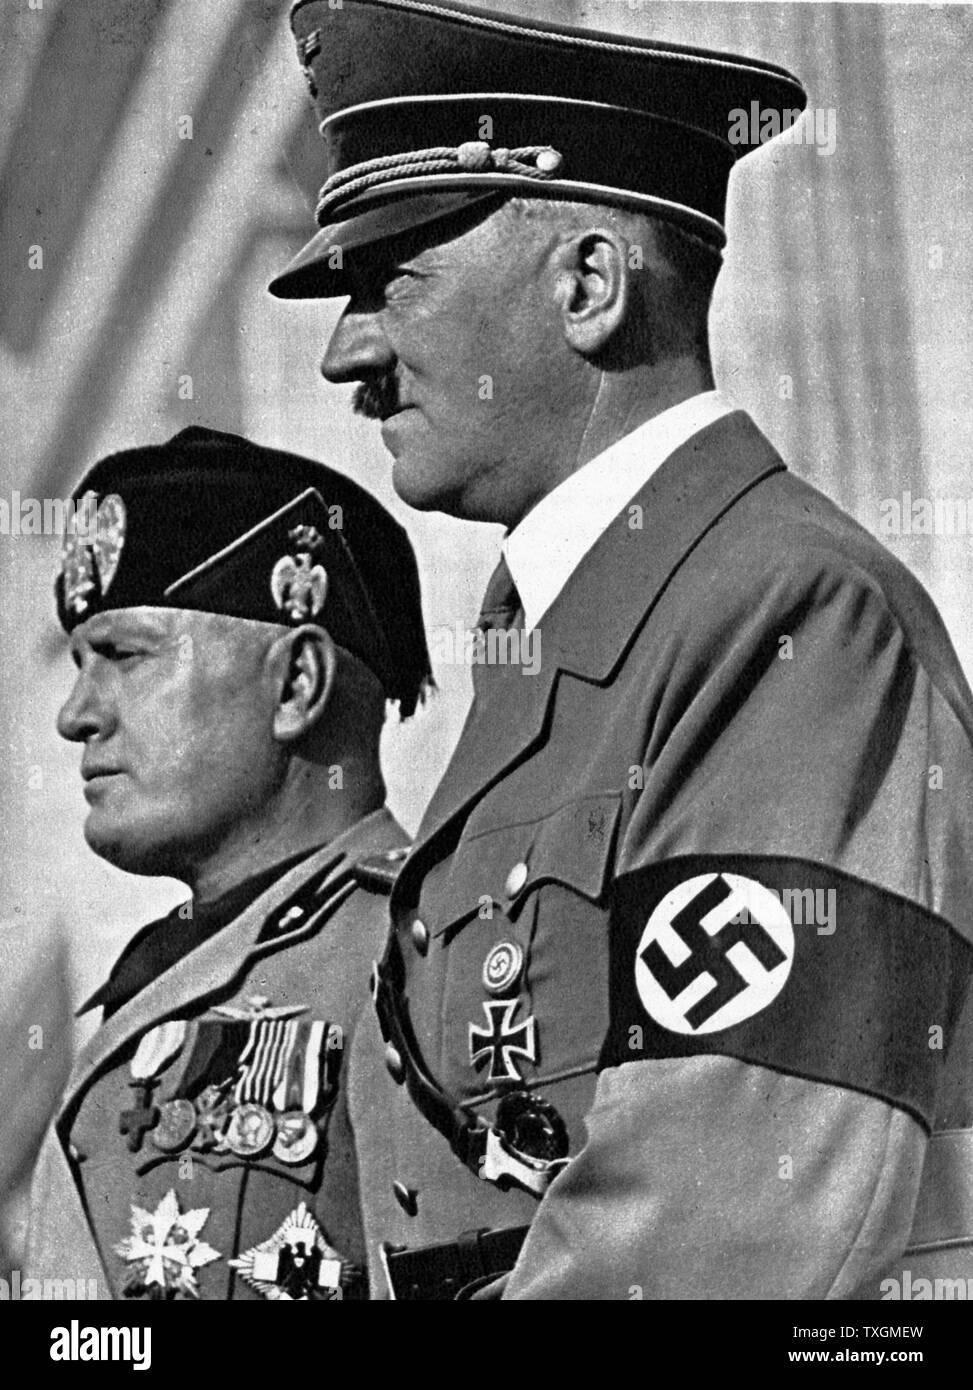 Adolph Hitler (1889-1945) and Benito Mussolini (1883-1945), German and Italian fascist dictators Stock Photo